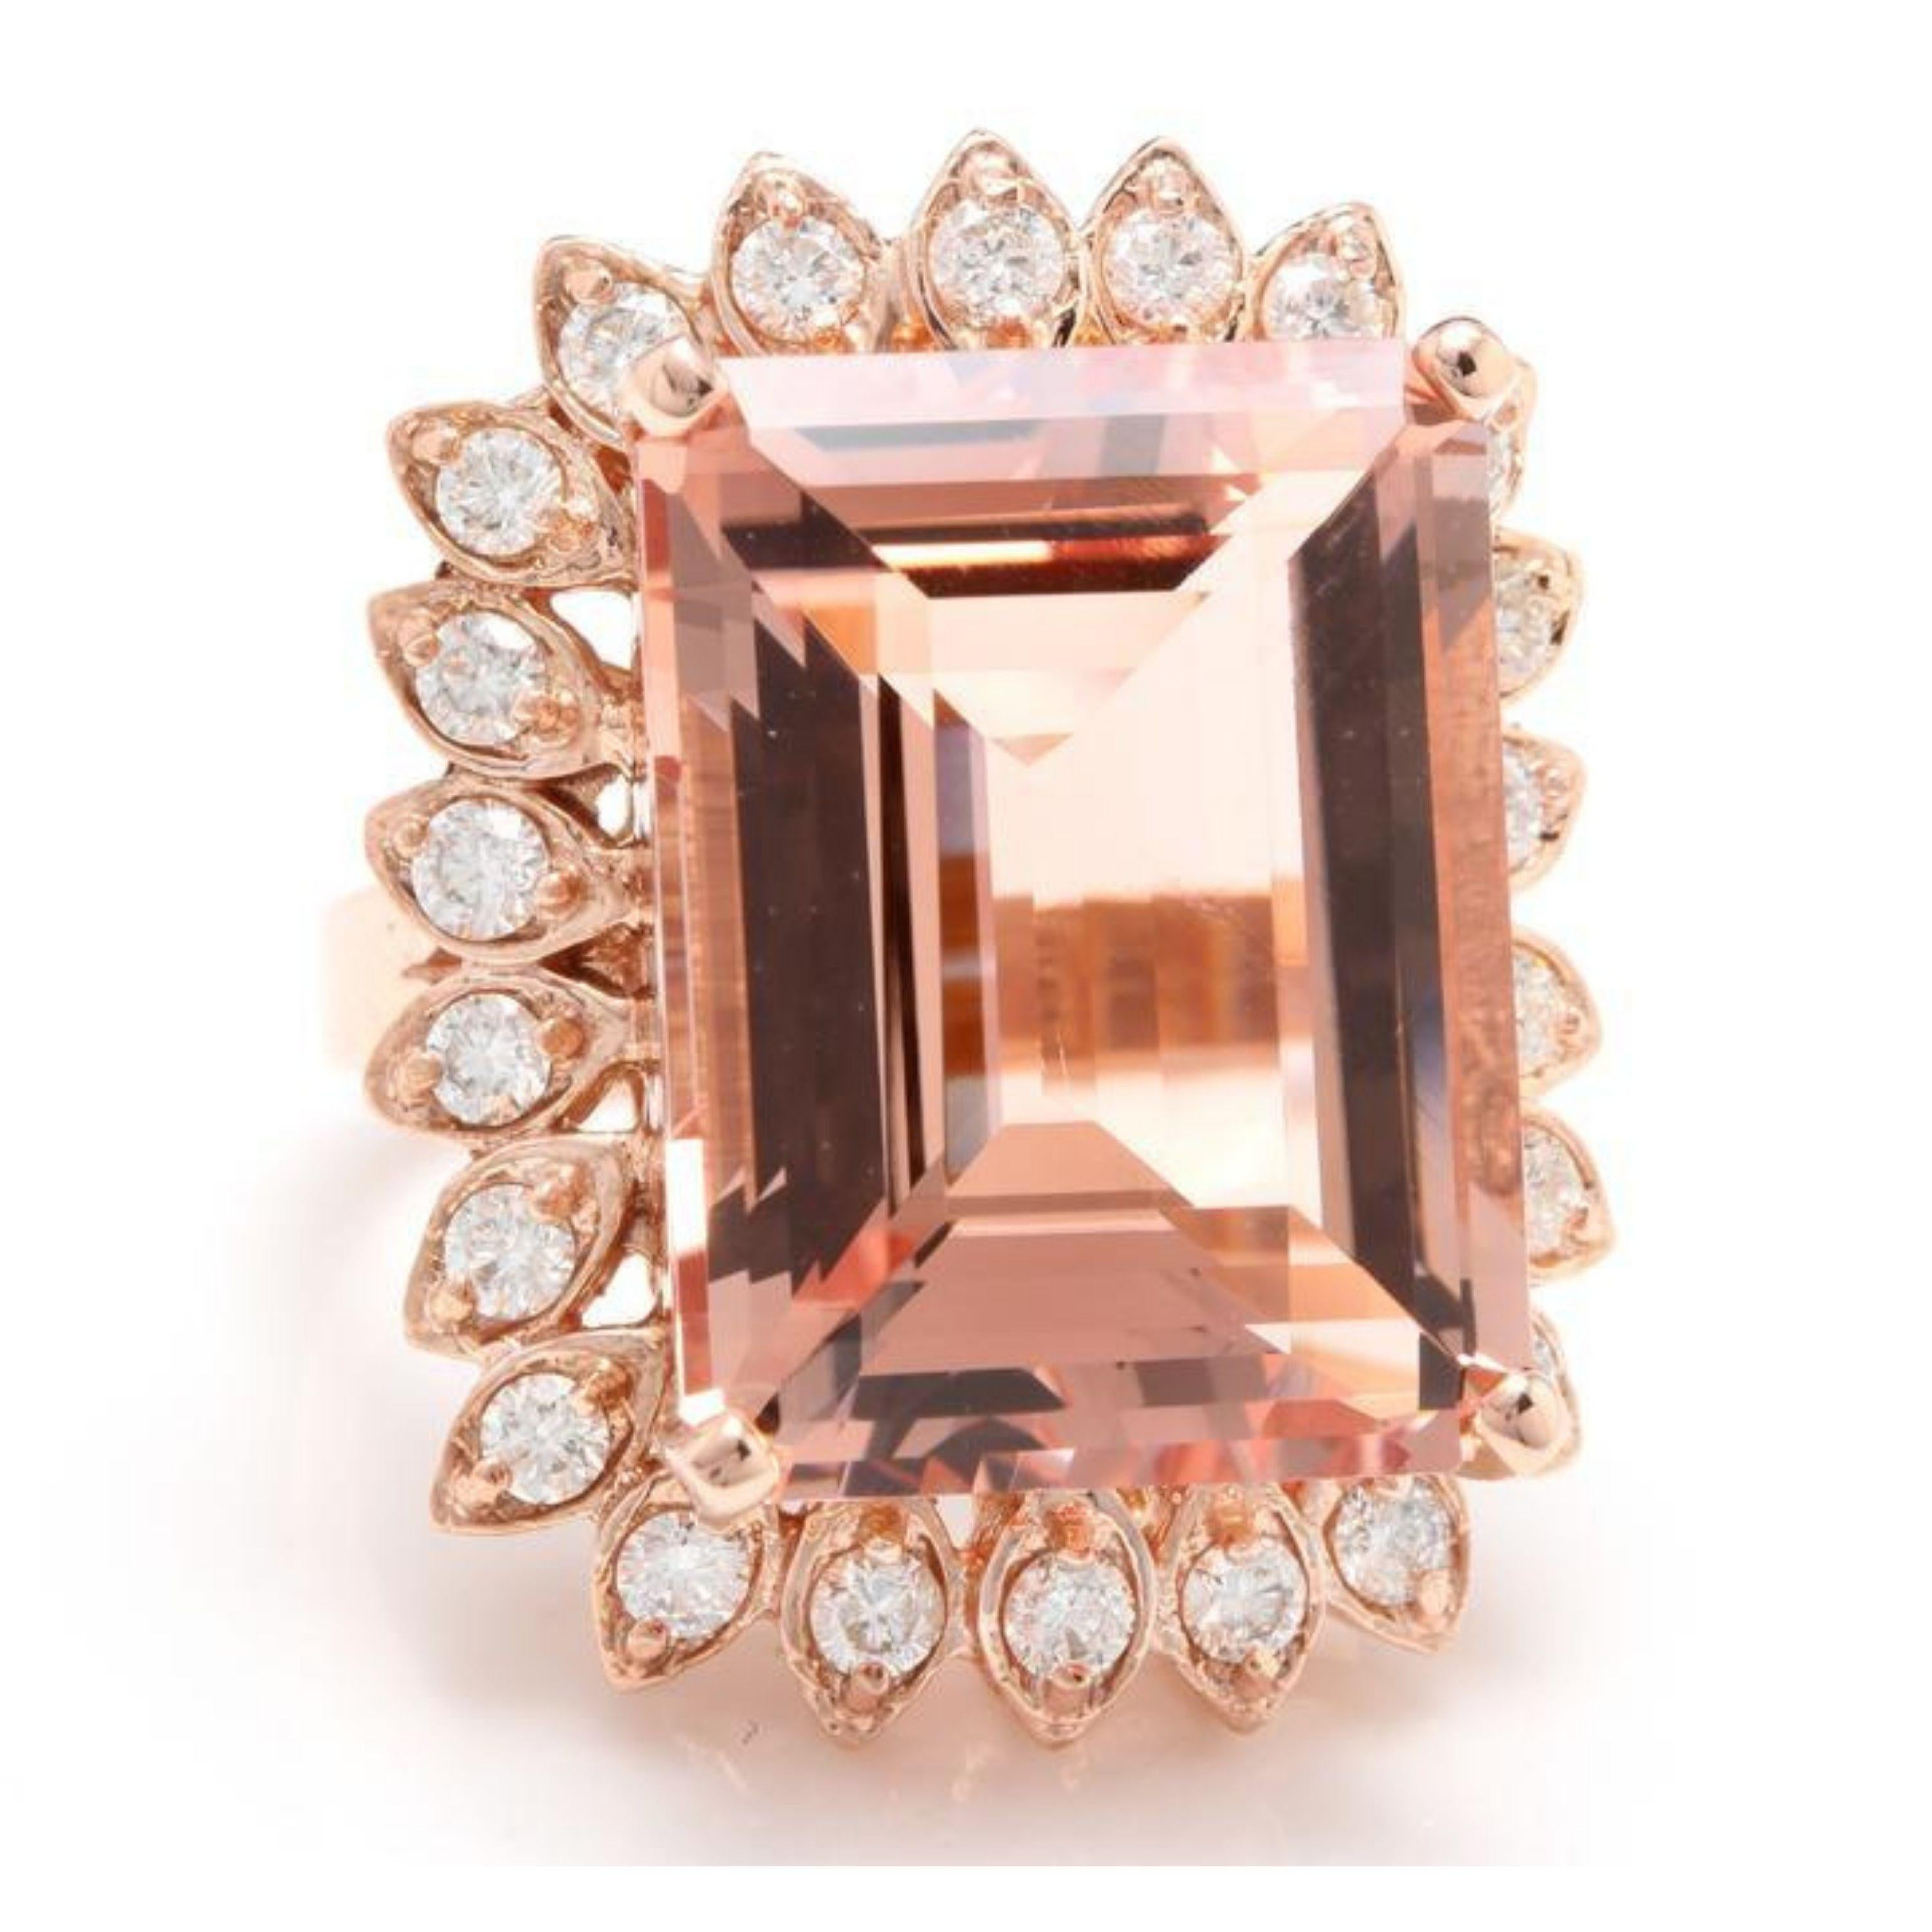 26.80 Carats Exquisite Natural Peach Morganite and Diamond 14K Solid Rose Gold Ring

Total Natural Morganite Weight: Approx. 25.00 Carats

Morganite Measures: Approx. 21.00 x 16.00mm

Natural Round Diamonds Weight: 1.80 Carats (color G-H / Clarity